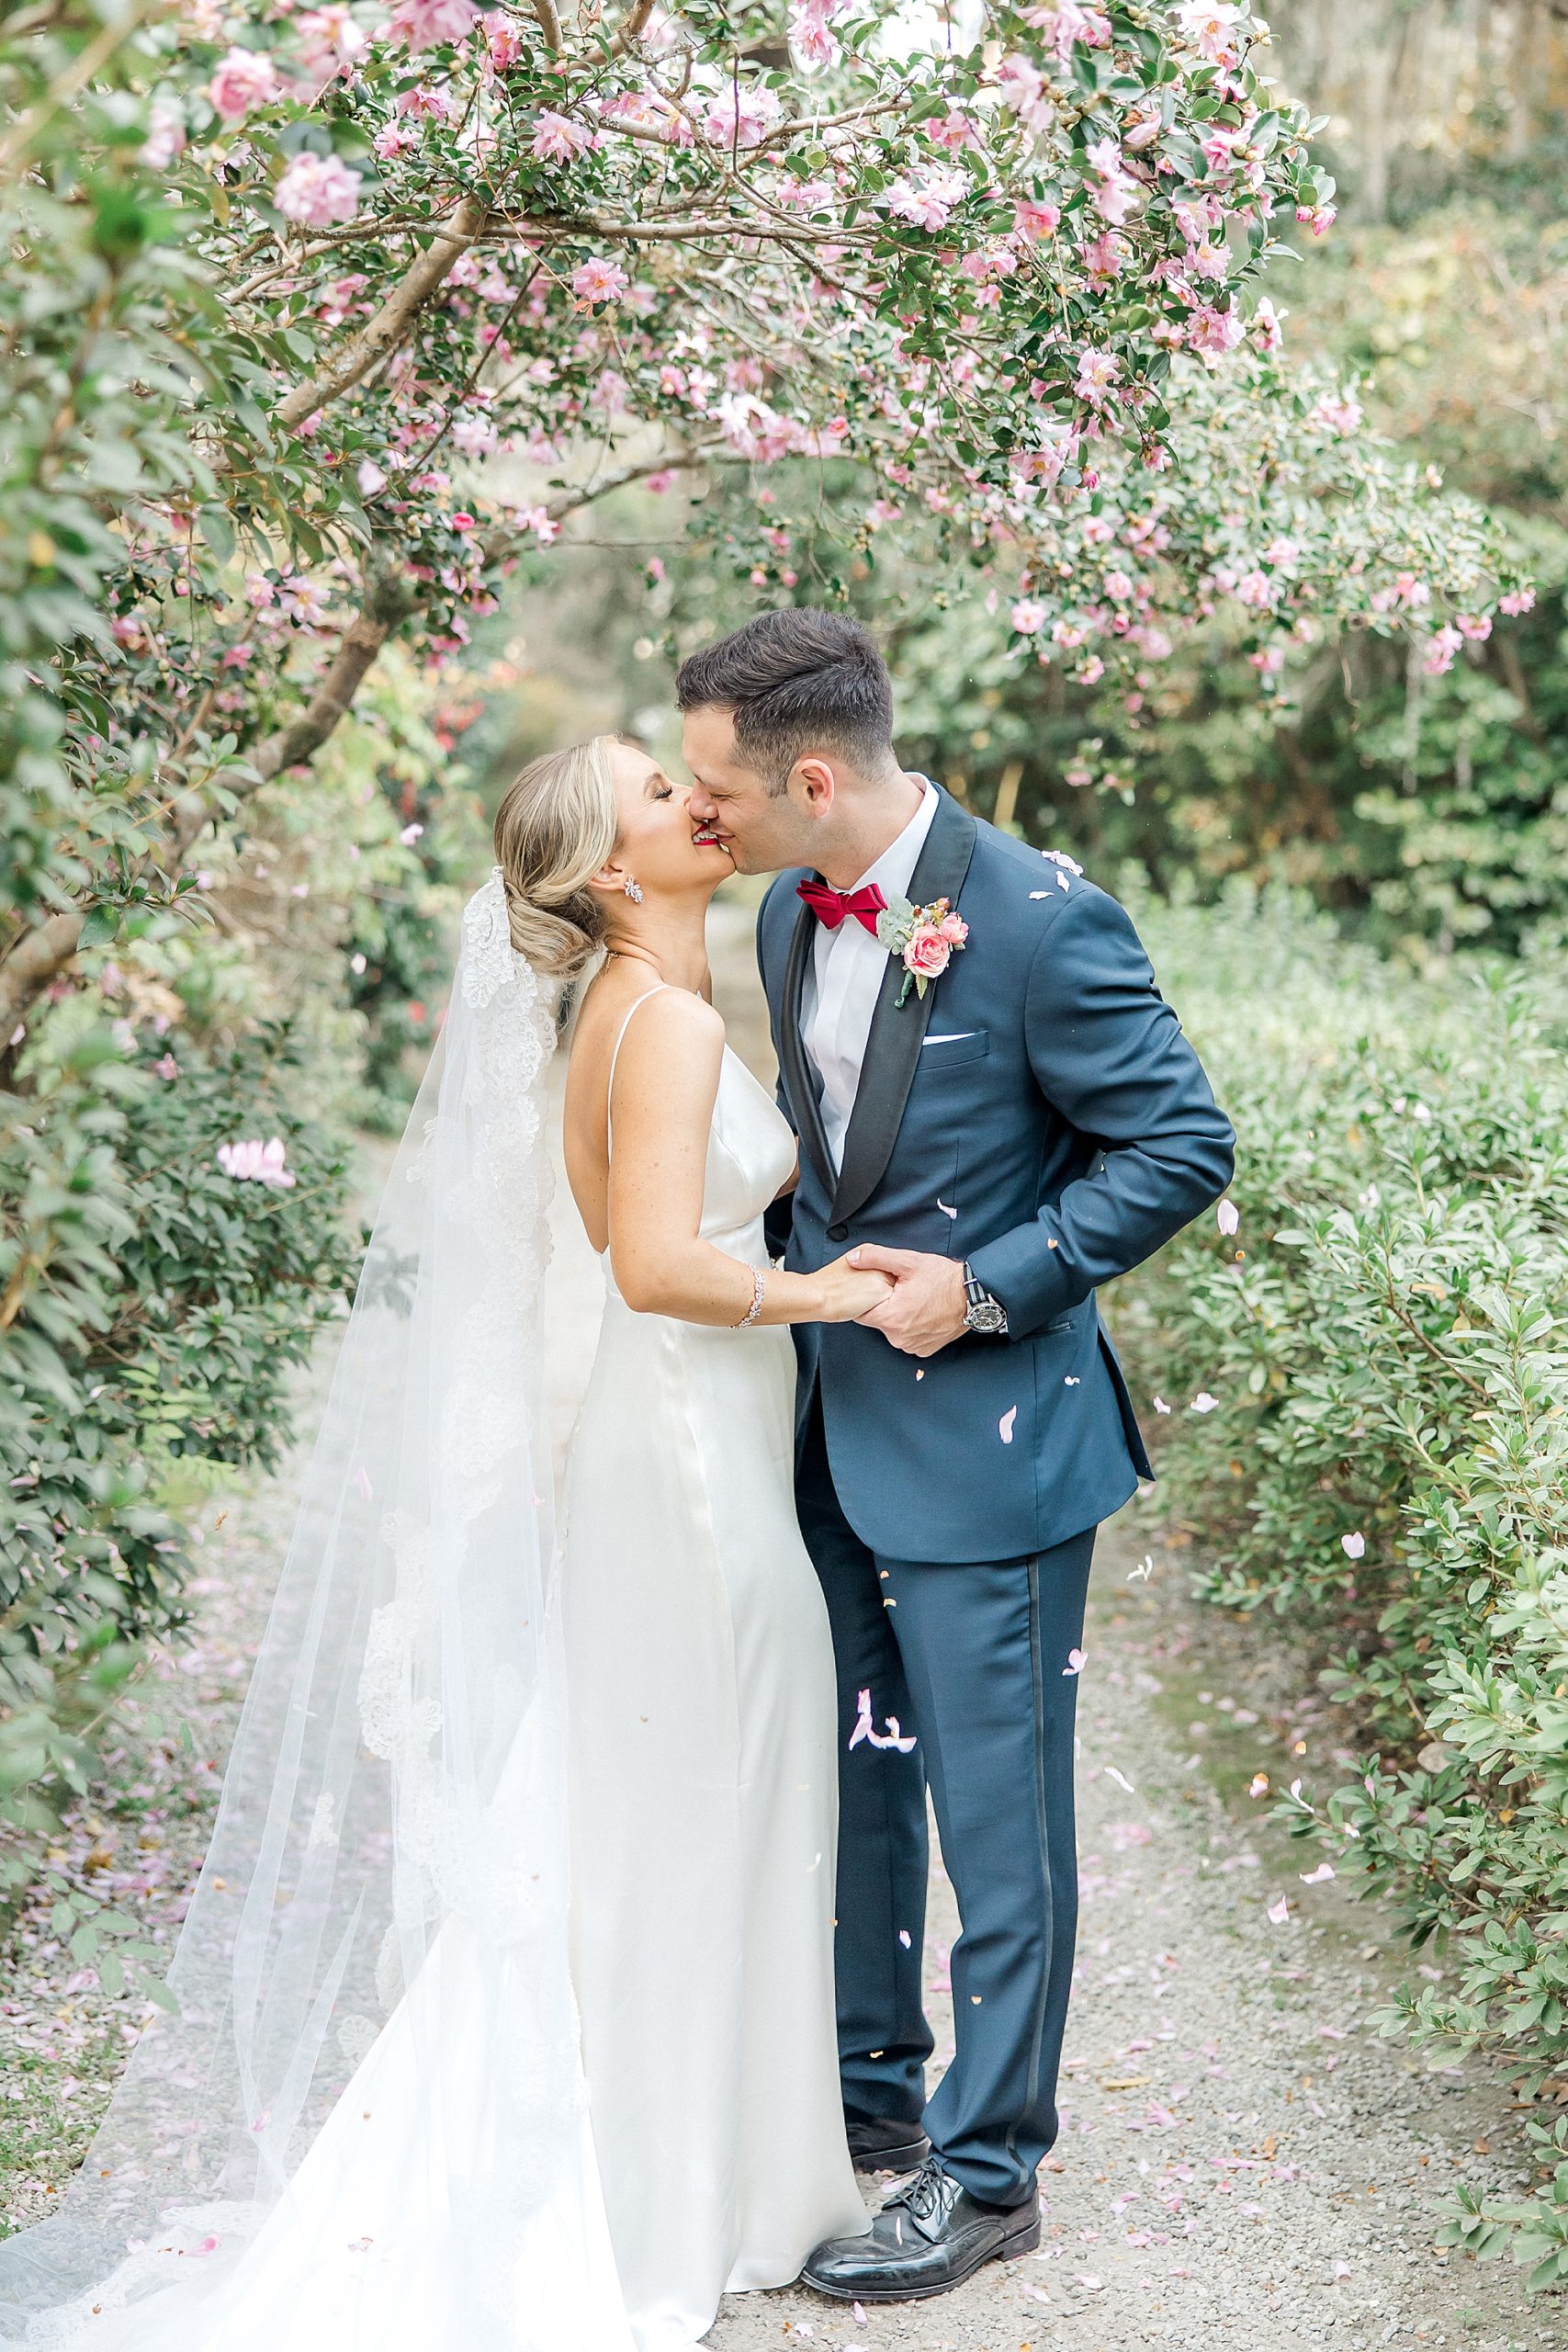 bride and groom kiss under tree with blooming flowers